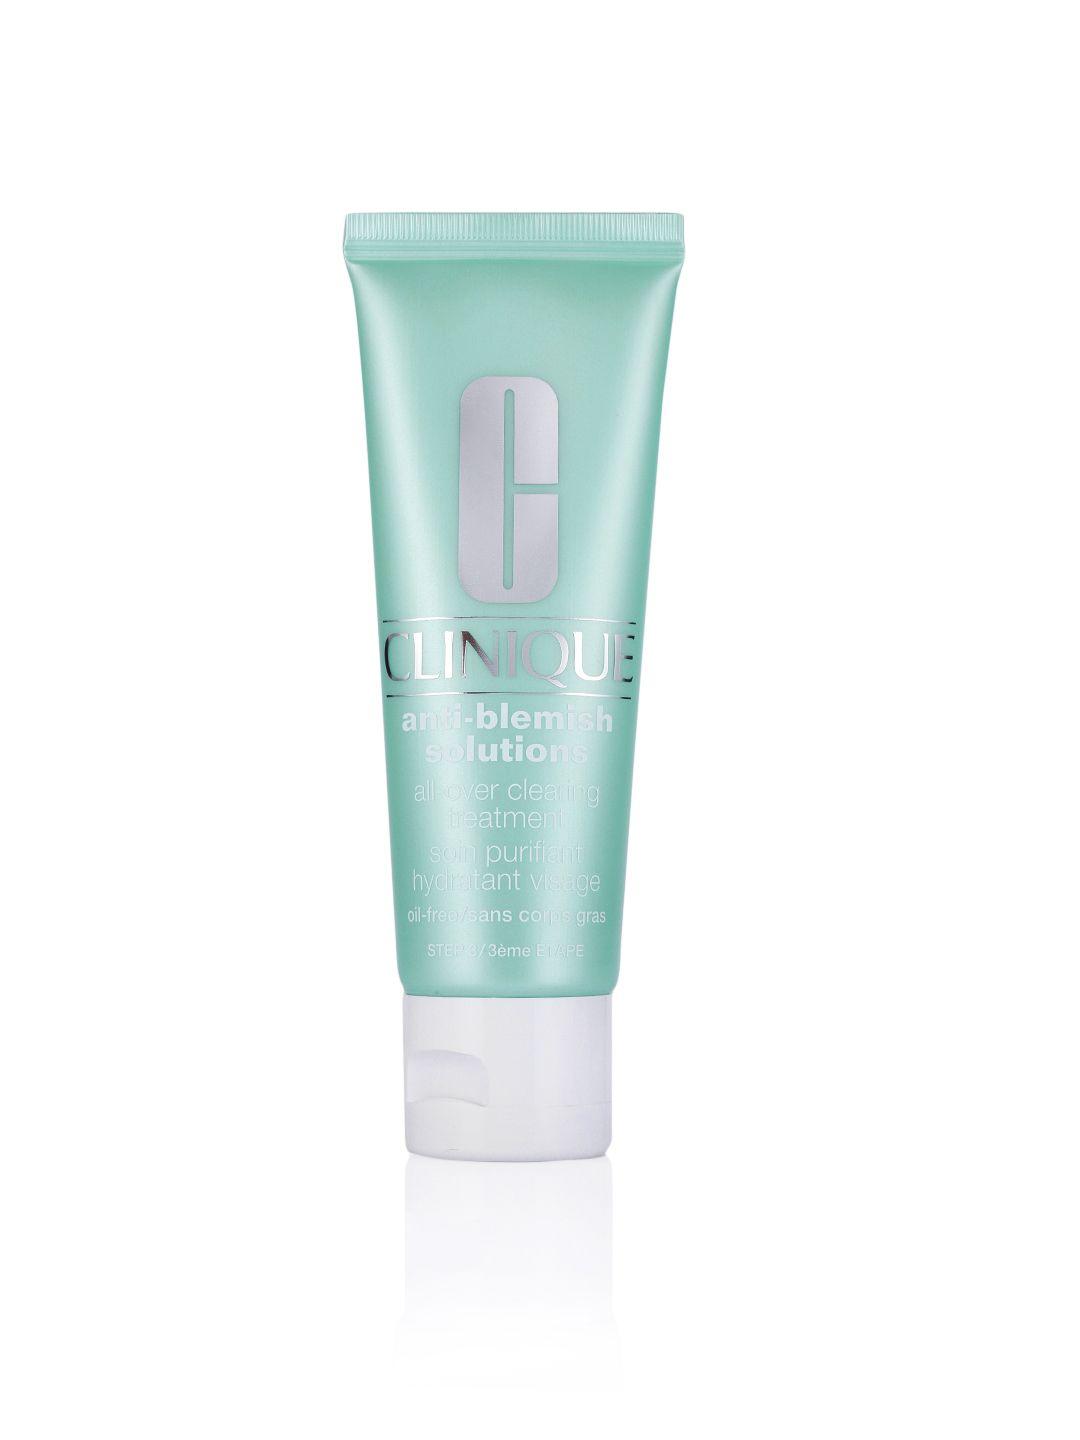 clinique anti-blemish solutions all over clearing treatment 50ml